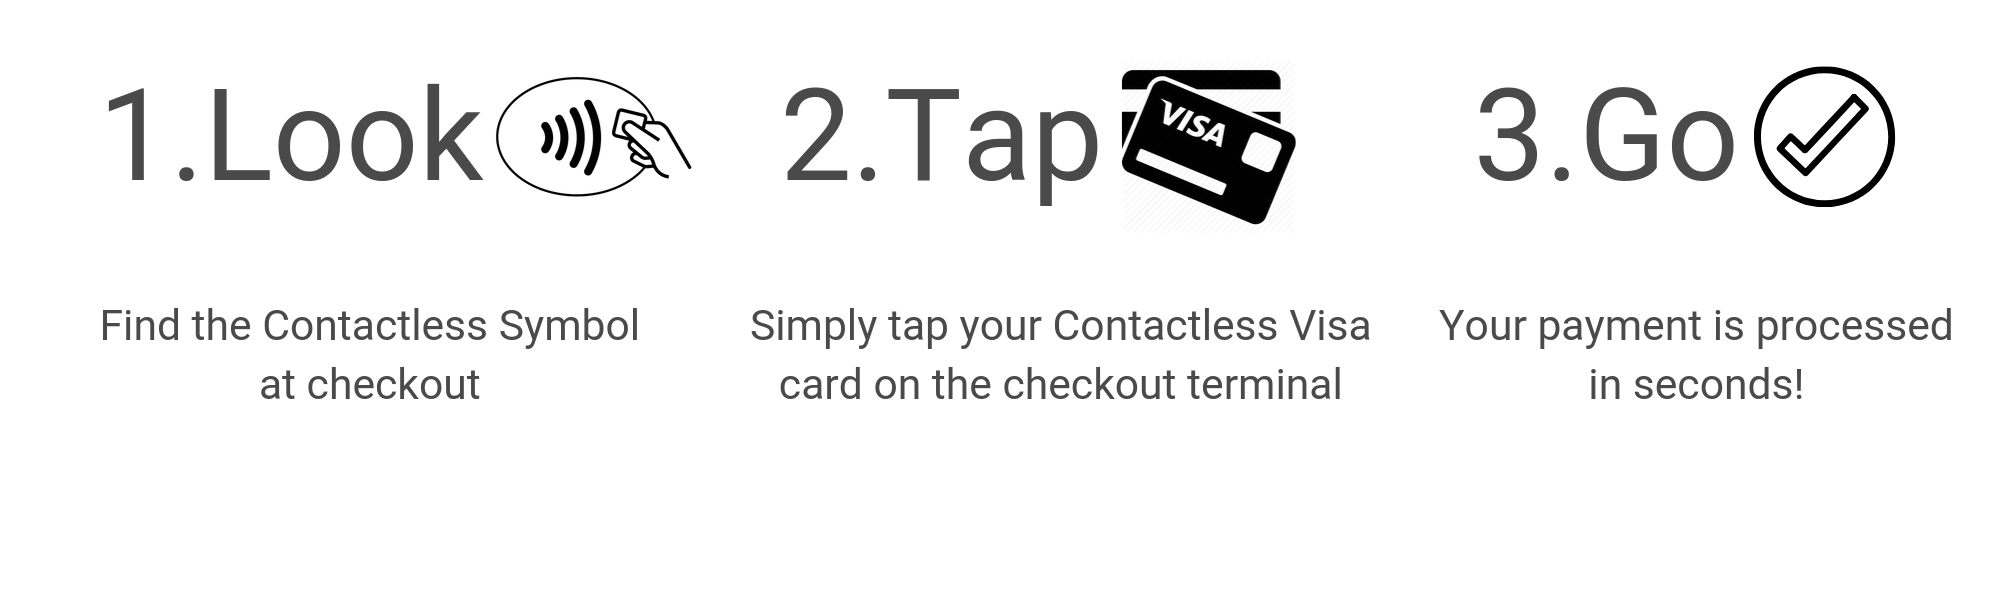 1.Look find the contactless symbol at checkout 2. tap simply tap your contactless visa card on the checkout terminal 3. go your payment is process in seconds!